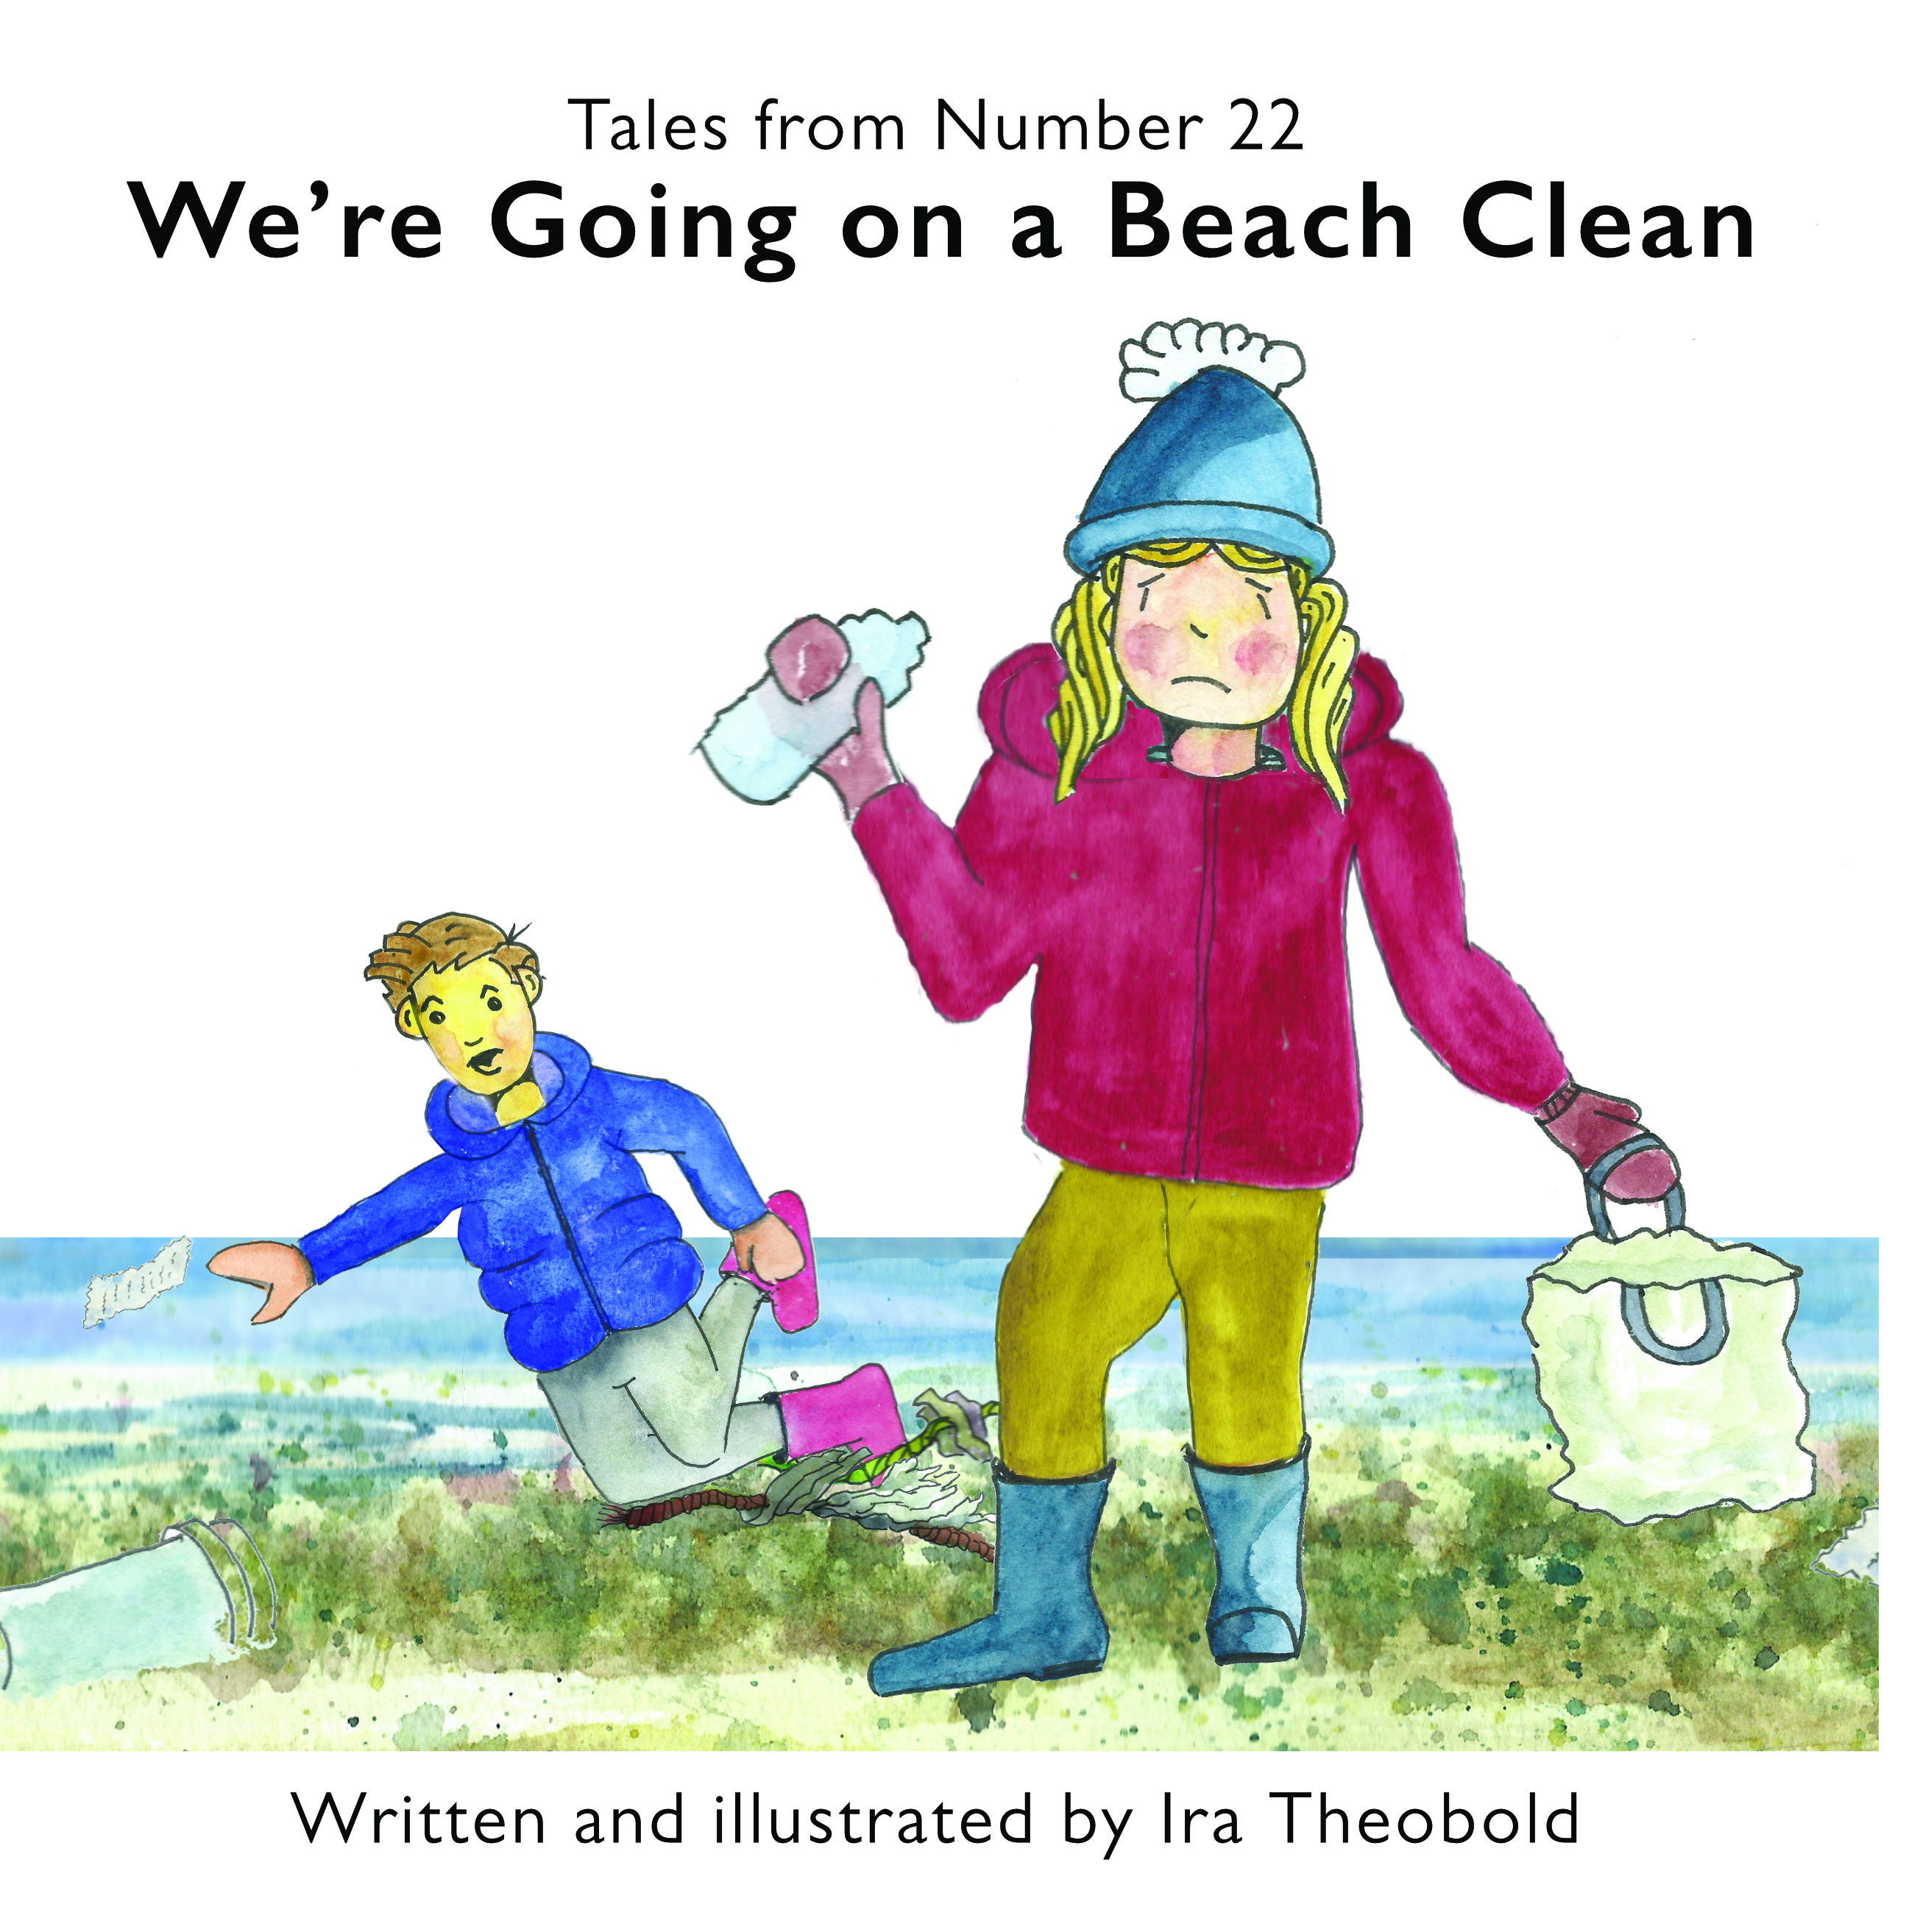 We're Going on a Beach Clean